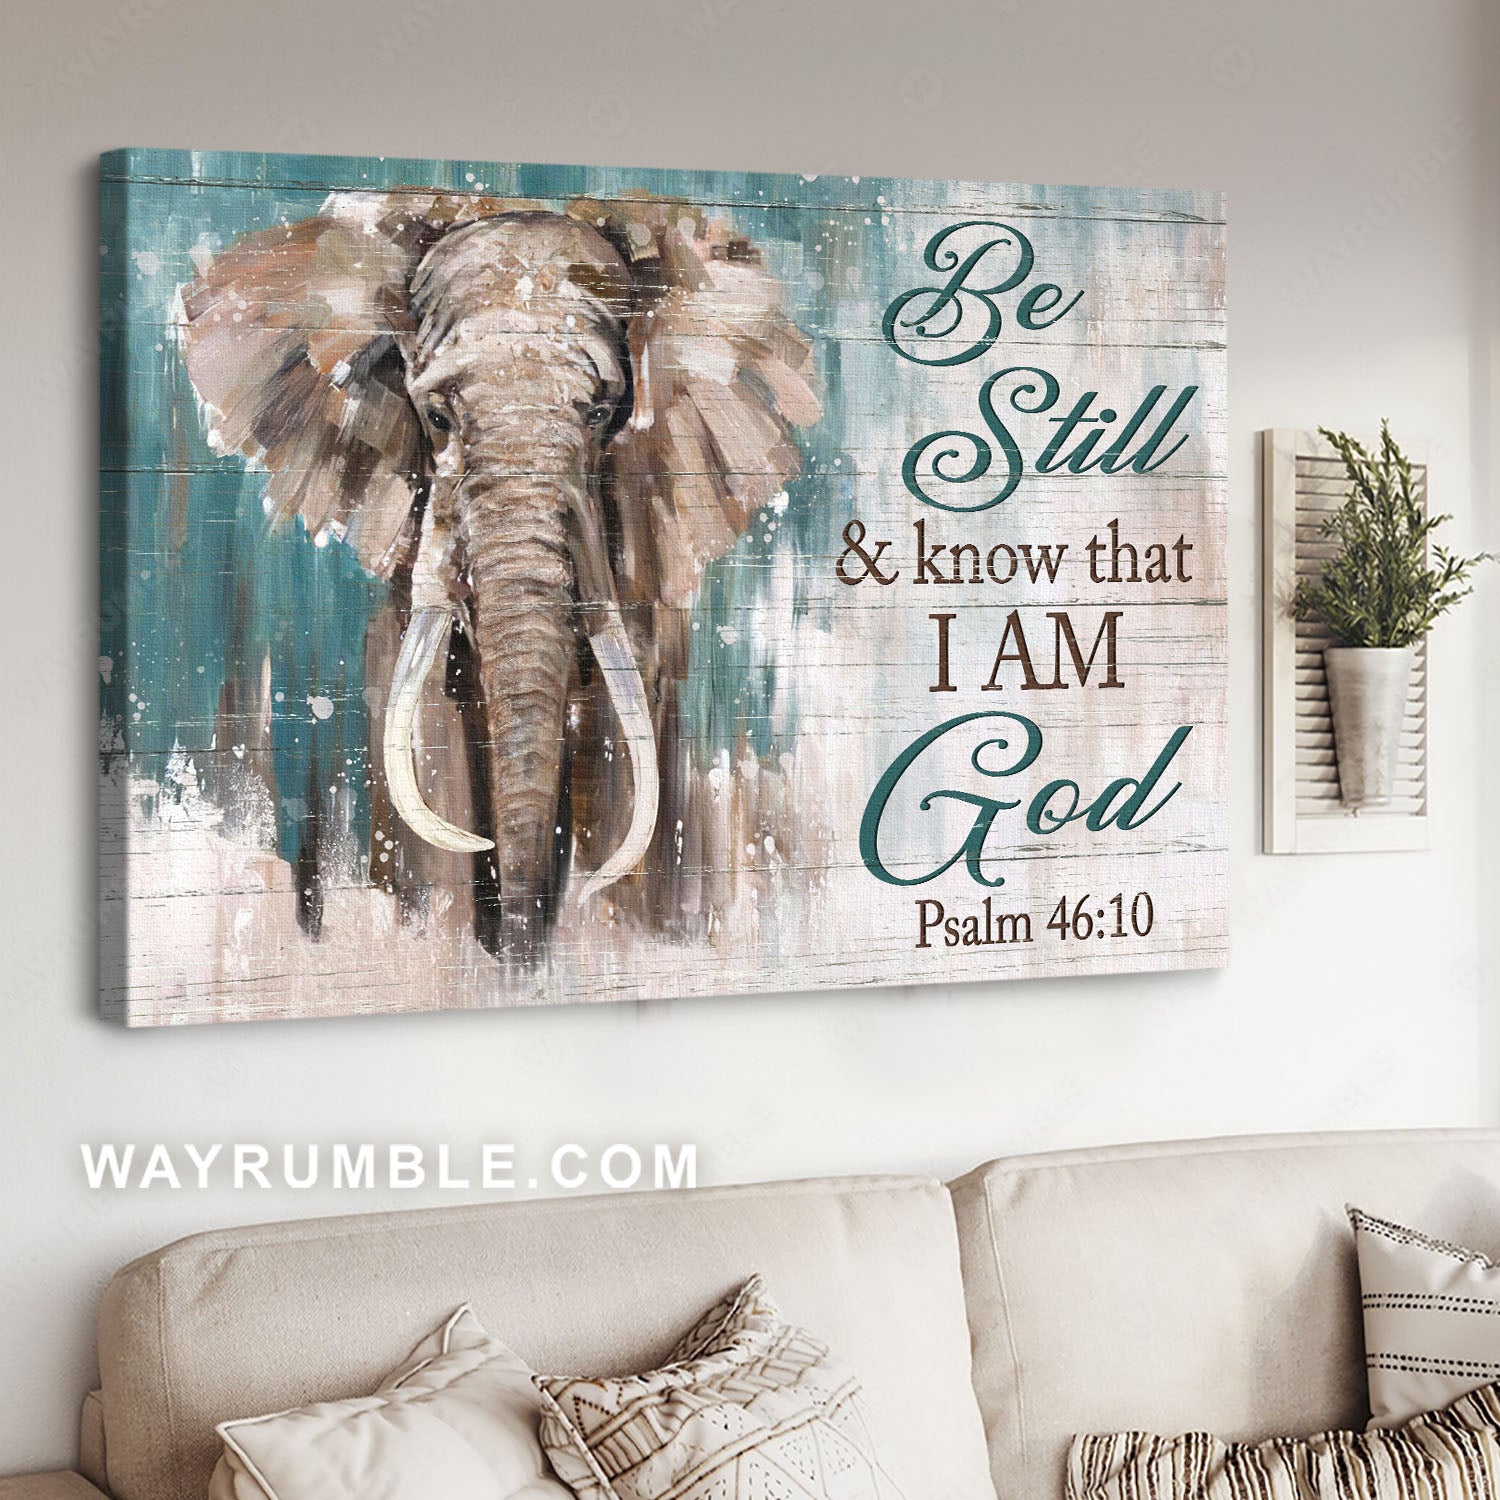 Elephant drawing, Watercolor painting, Bible verse, Be still and know that I am God - Jesus Landscape Canvas Prints, Home Decor Wall Art